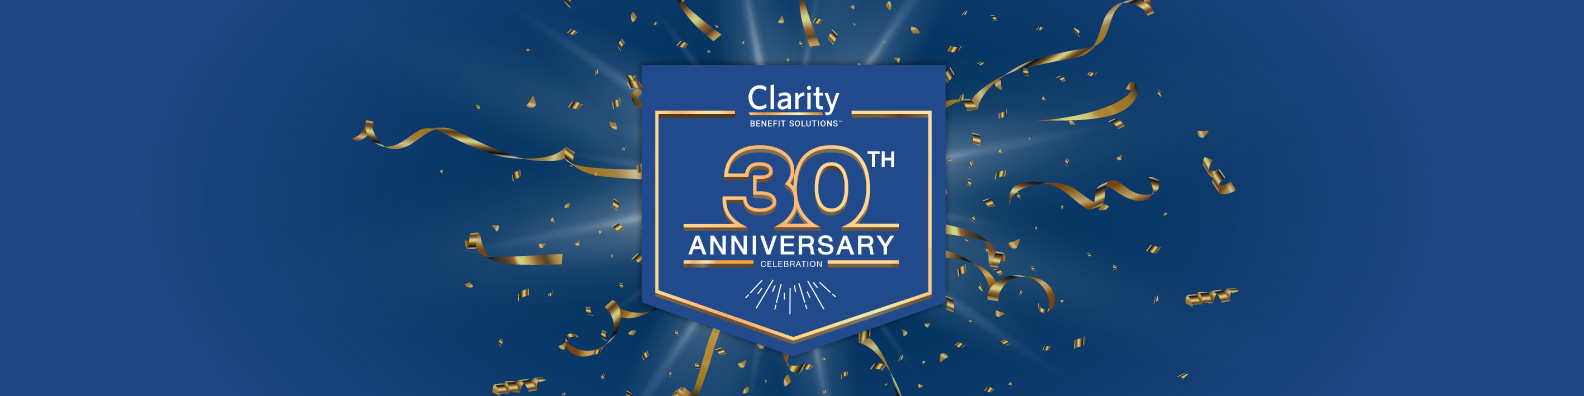 clarity benefit solutions 30th anniversary